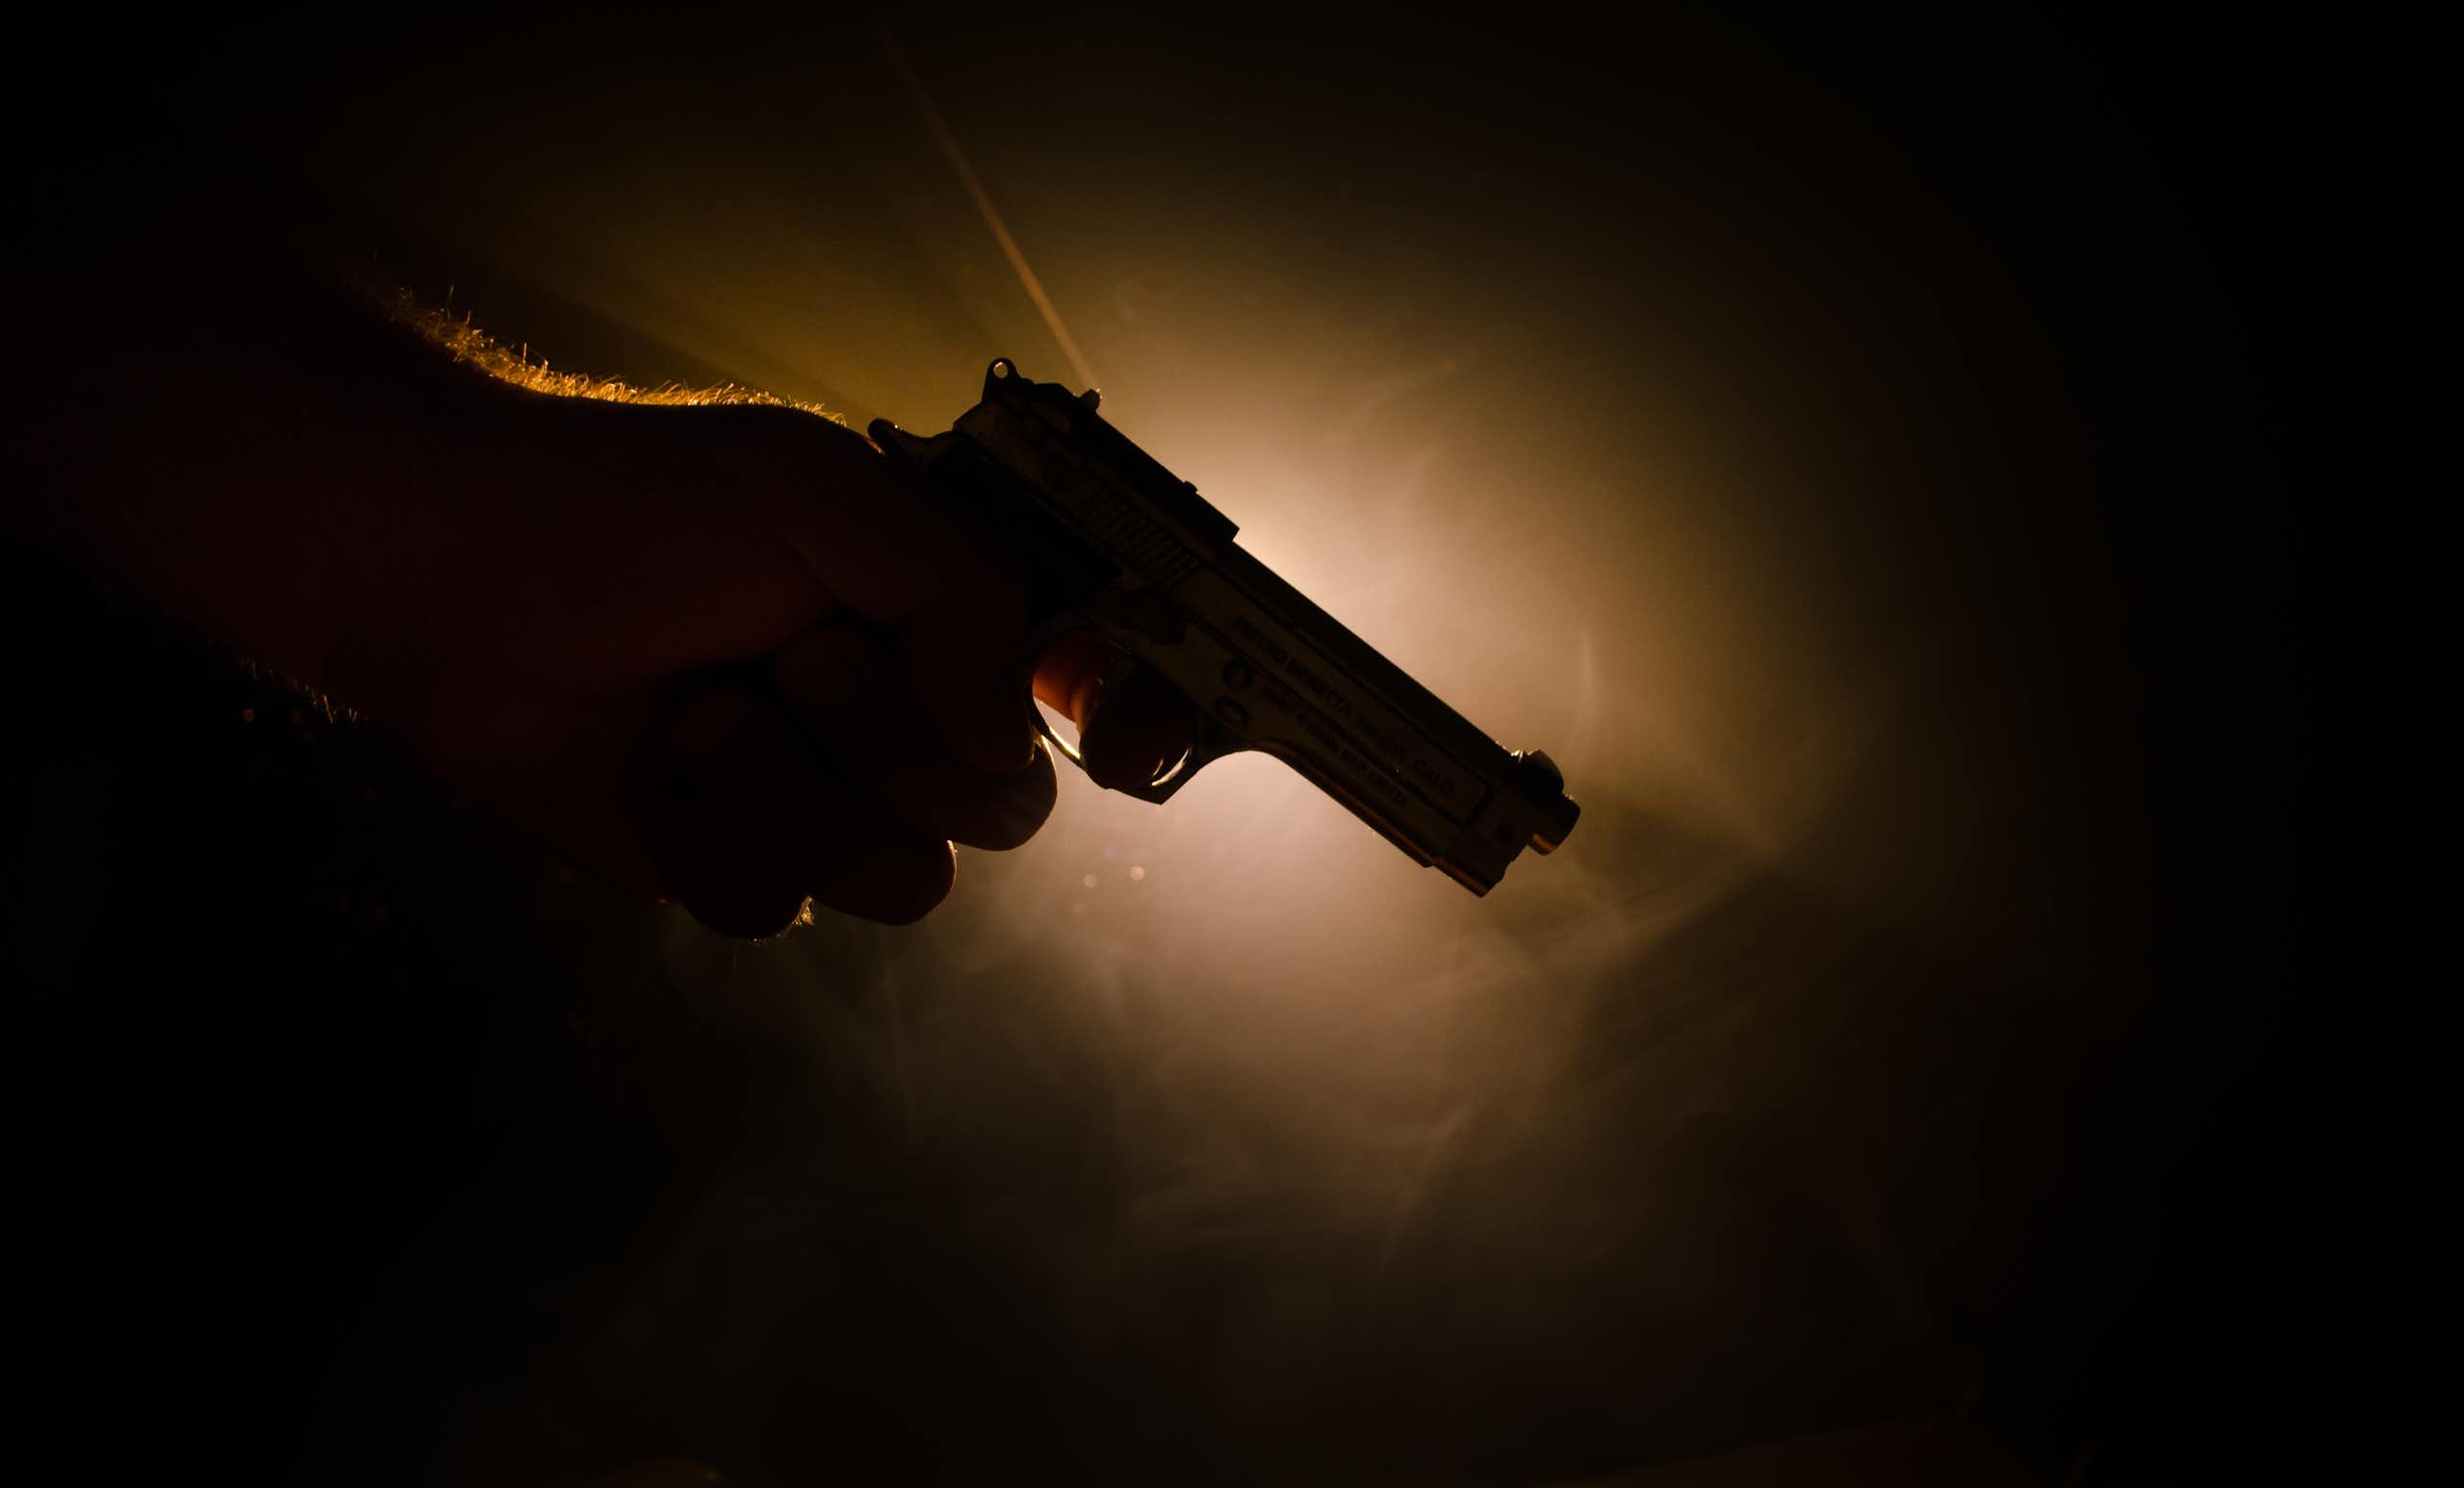 The silhouette of a man's hand holding a gun